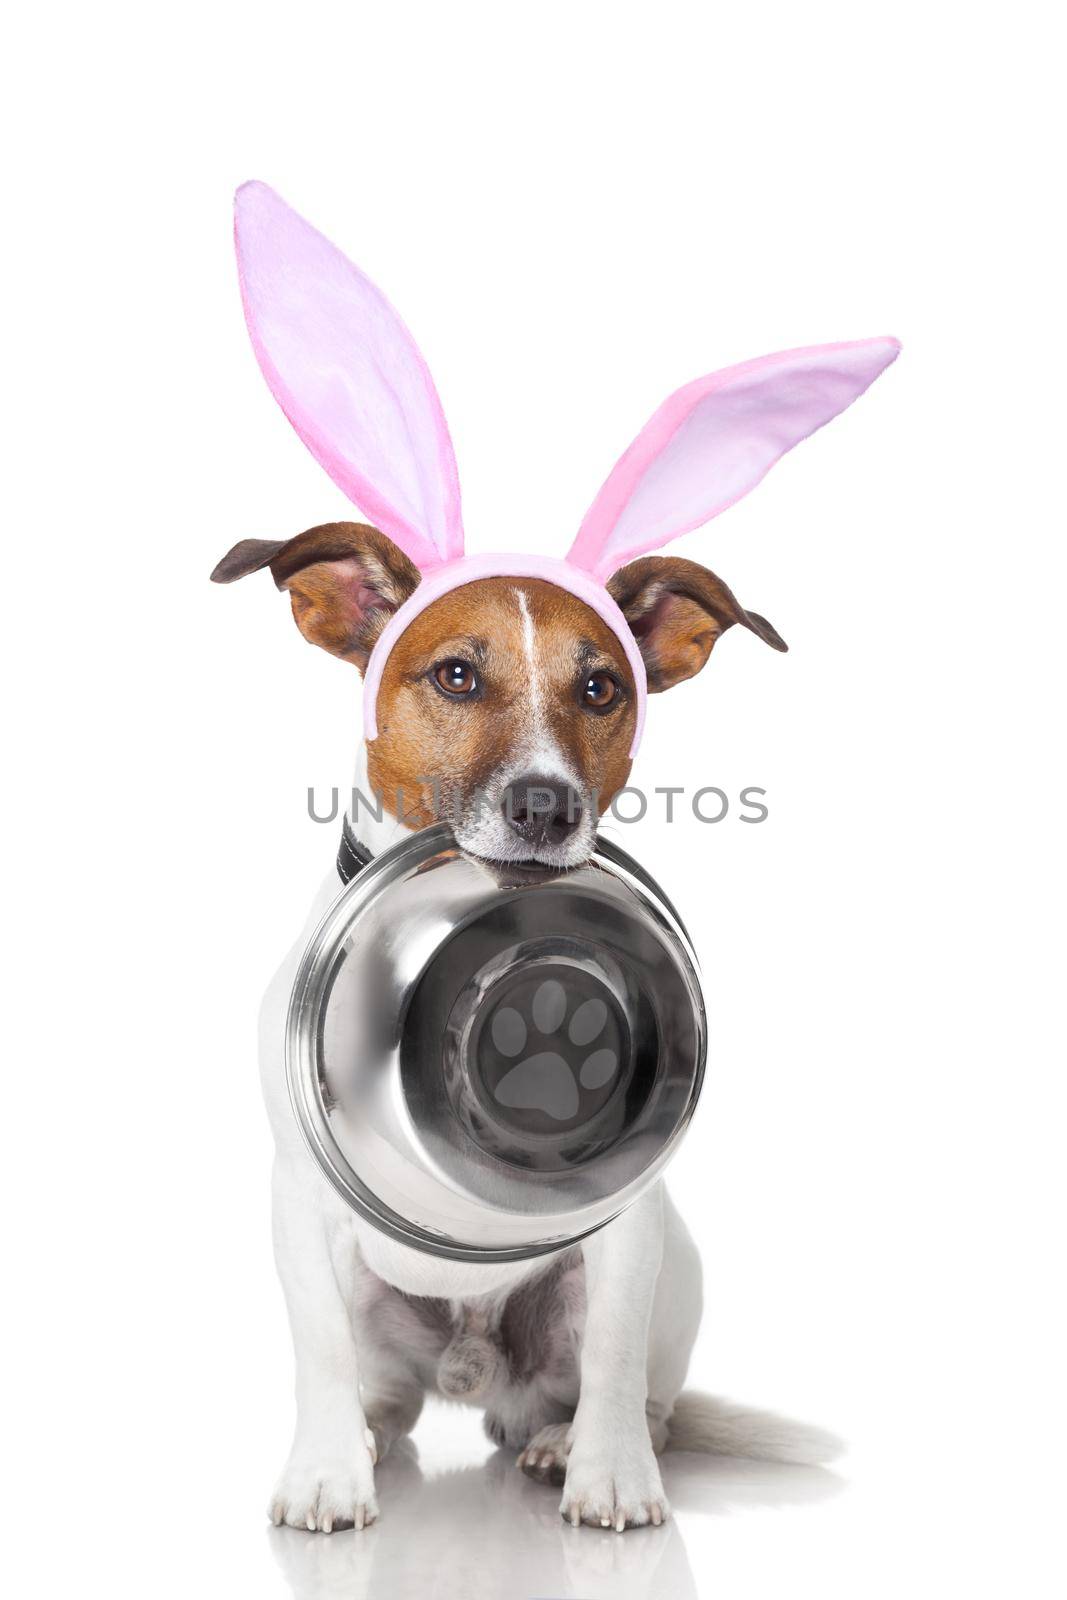 easter bunny ears jack russell dog , hungry with  food bowl in mouth, isolated on white background